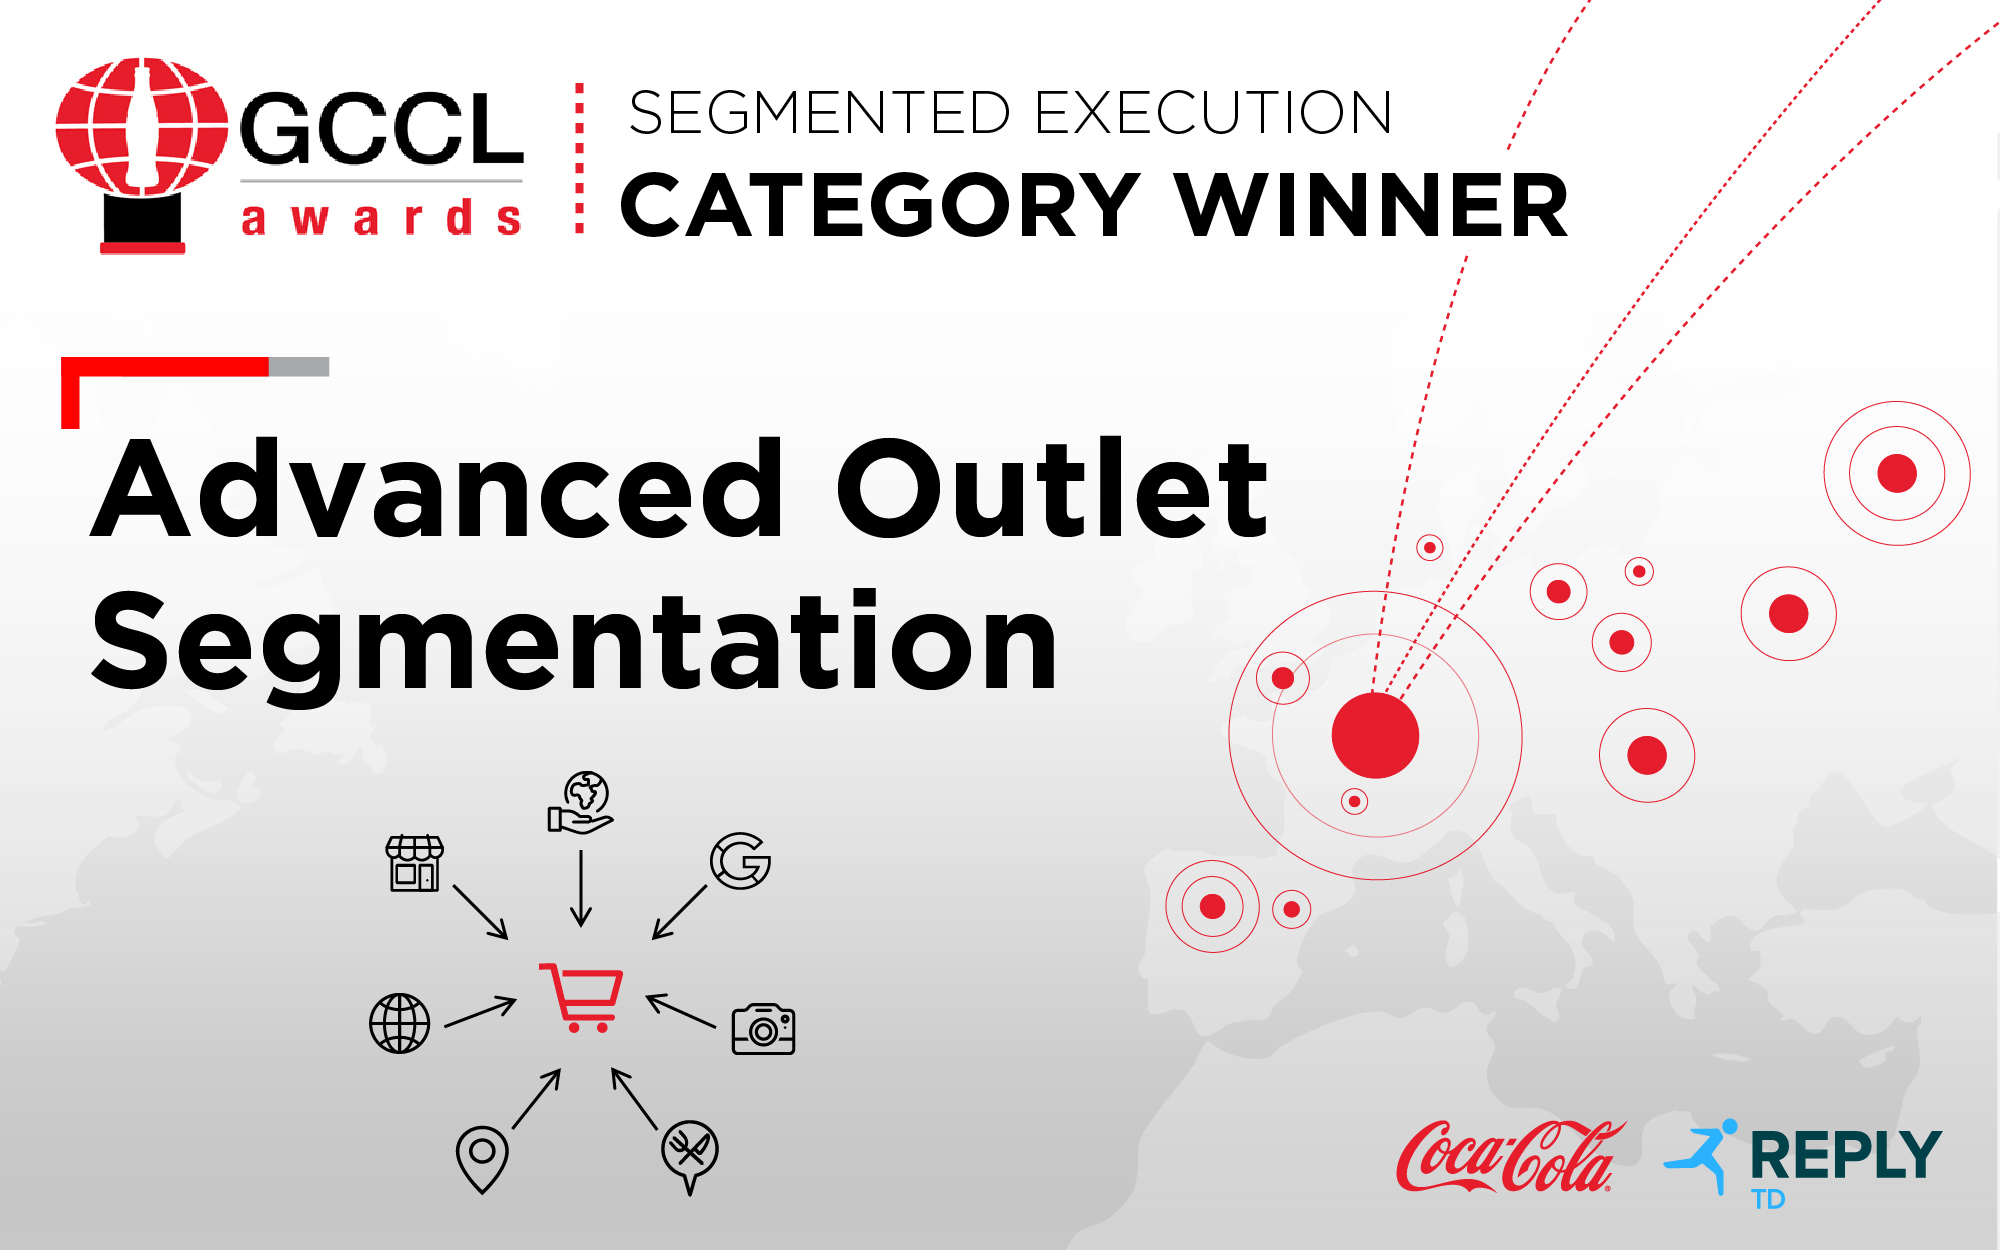 GCCL Award for Joint Project with Coca-Cola